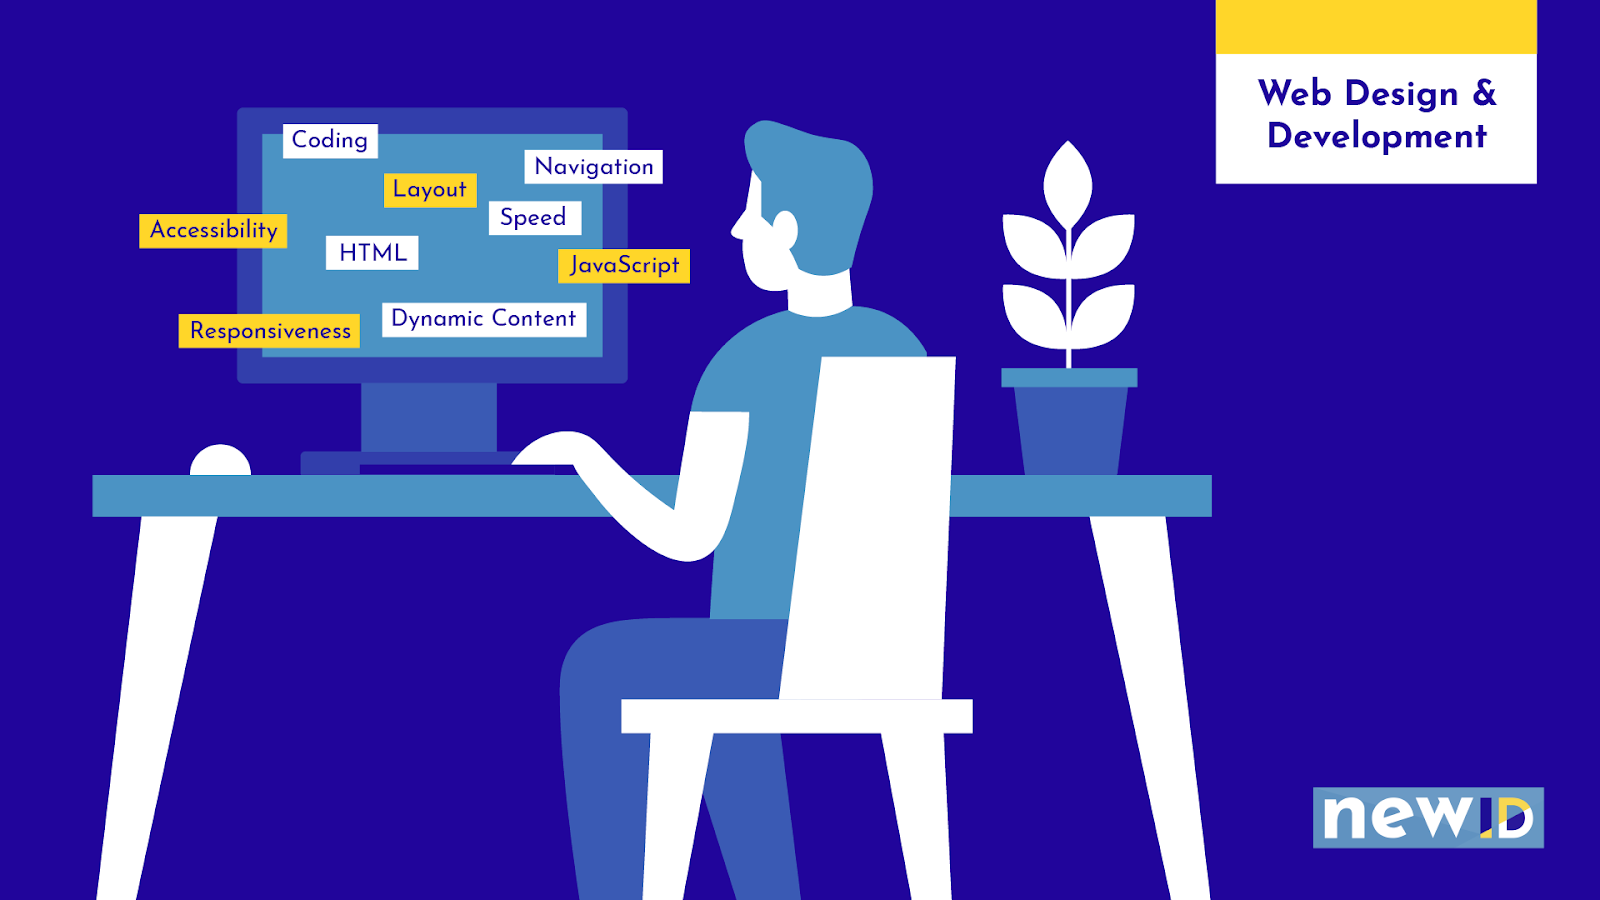 Web design & development illustration. An illustration of a man sitting at a computer, with website building terminology on the screen: coding; accessibility, HTML, responsiveness, layout, dynamic content, speed, navigation, JavaScript.